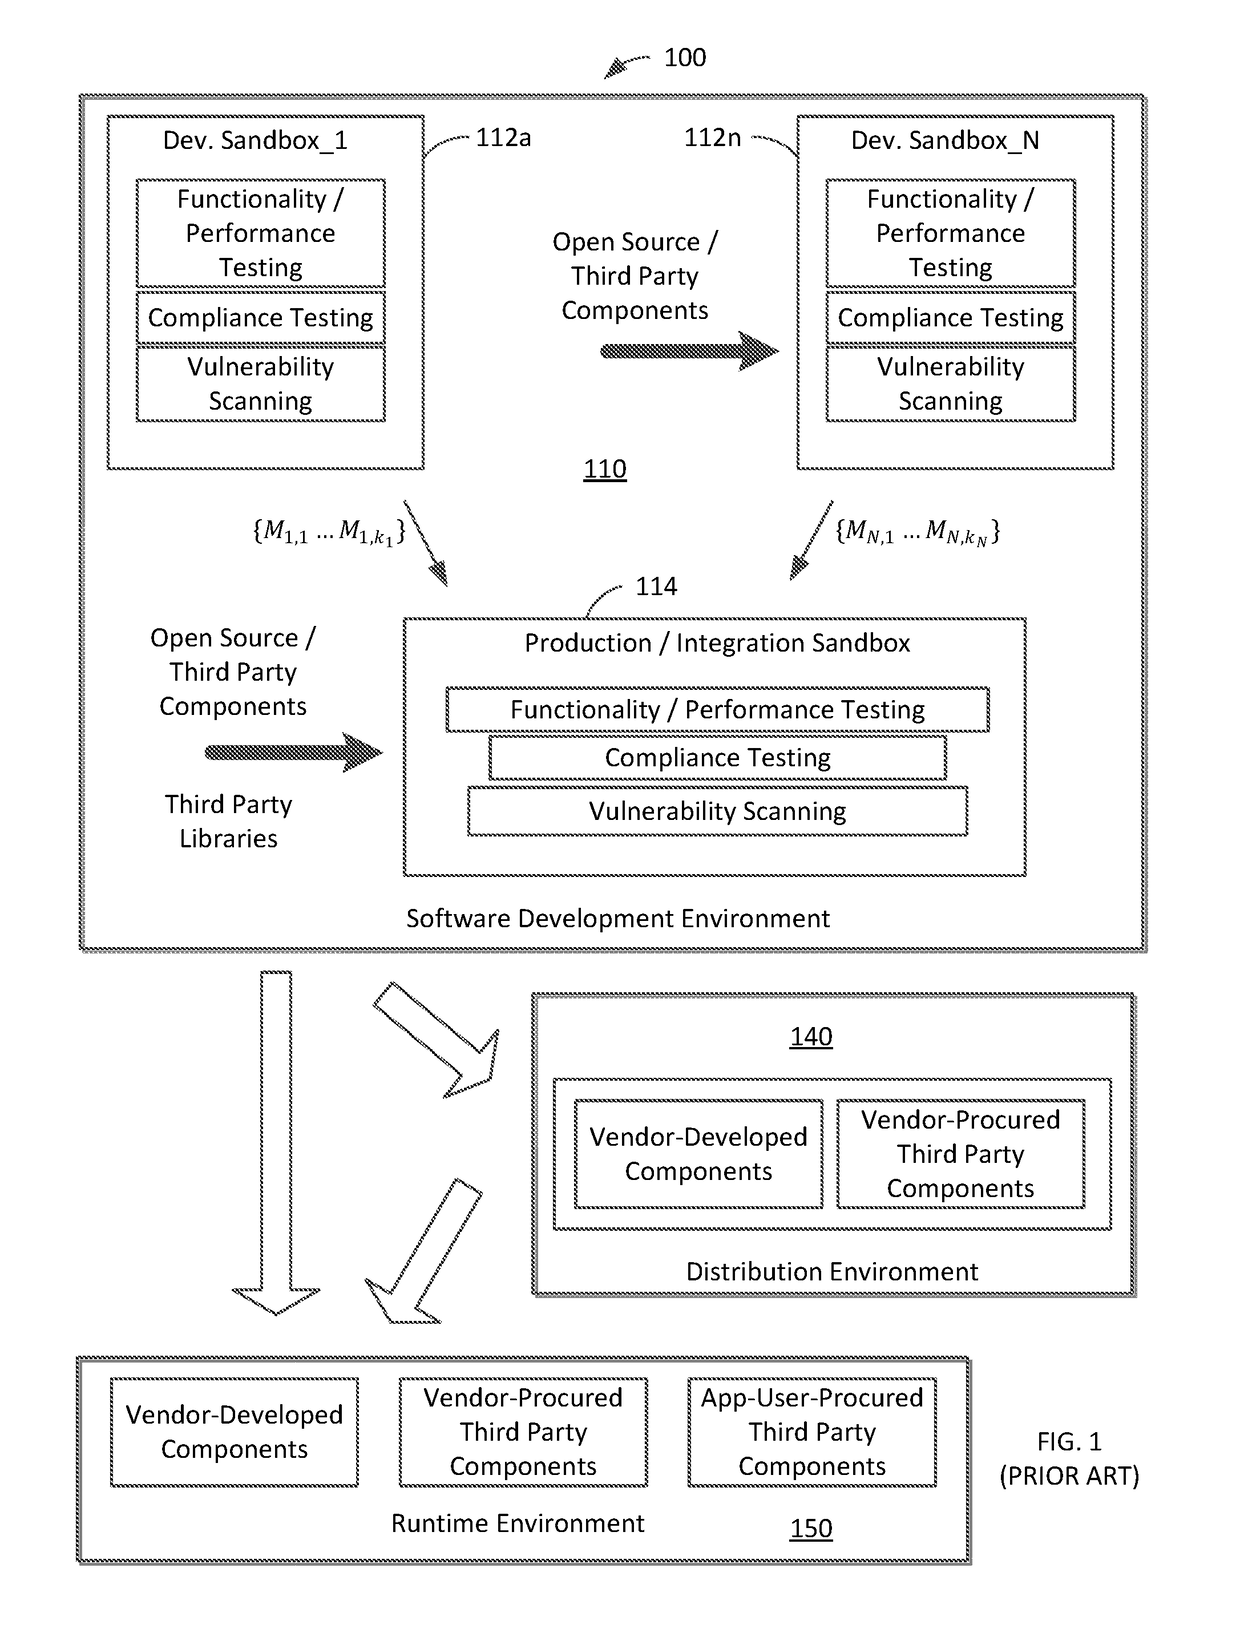 Systems and methods facilitating self-scanning of deployed software applications